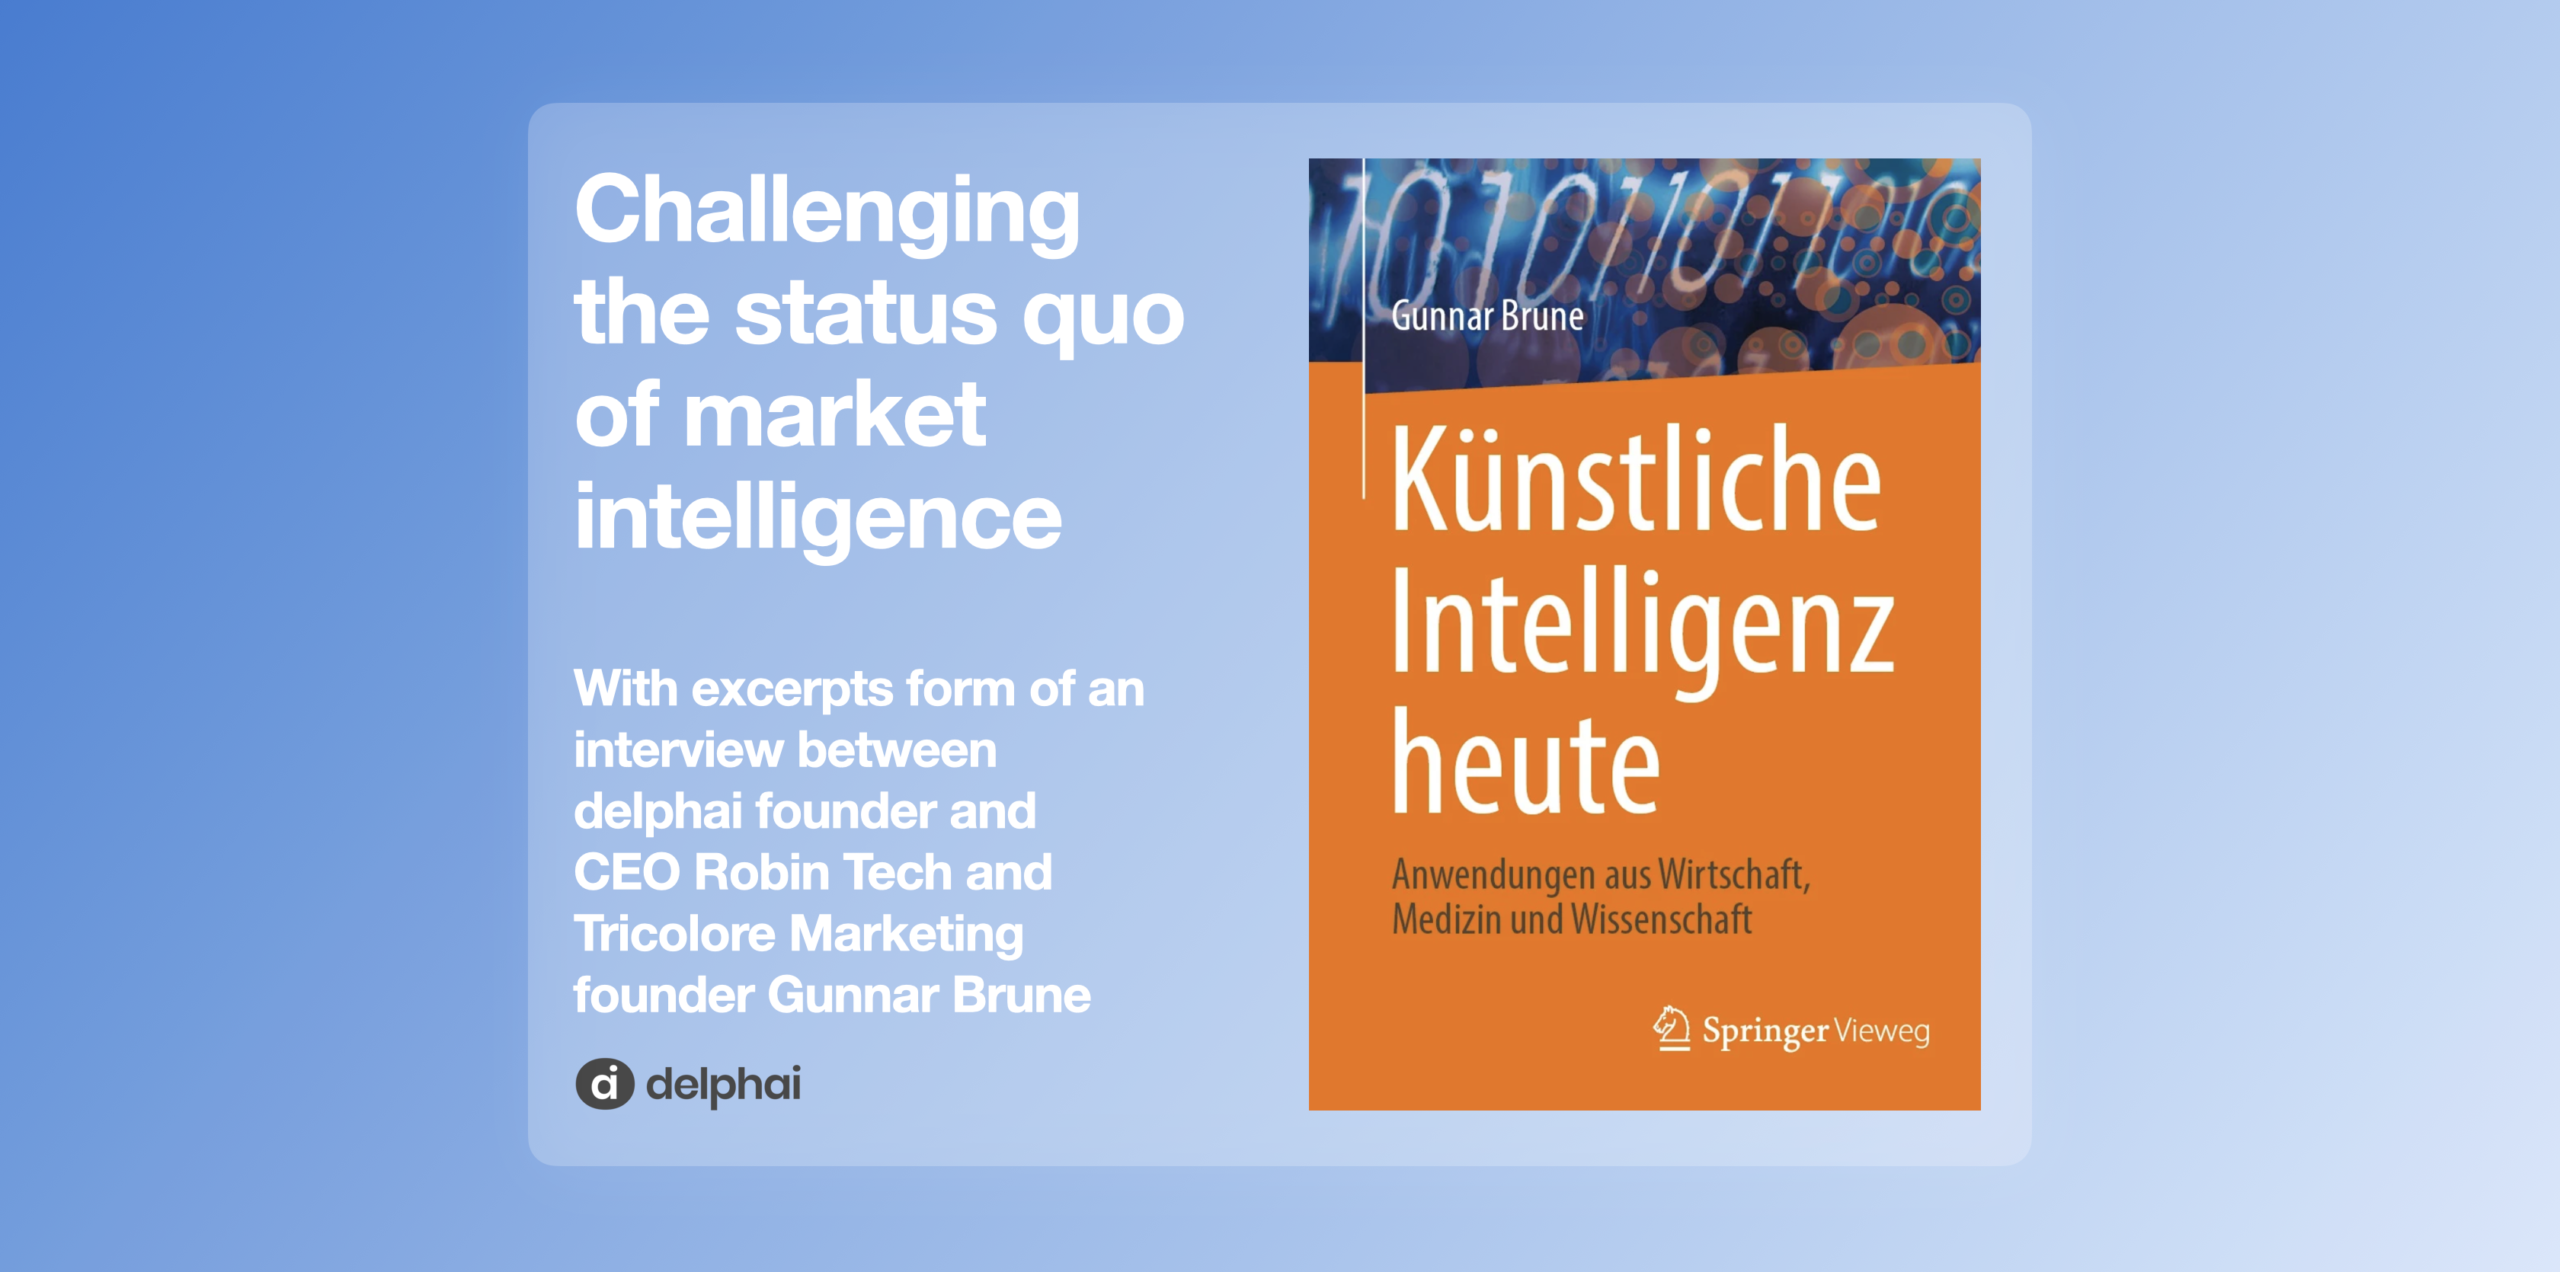 Challenging the status quo of market intelligence